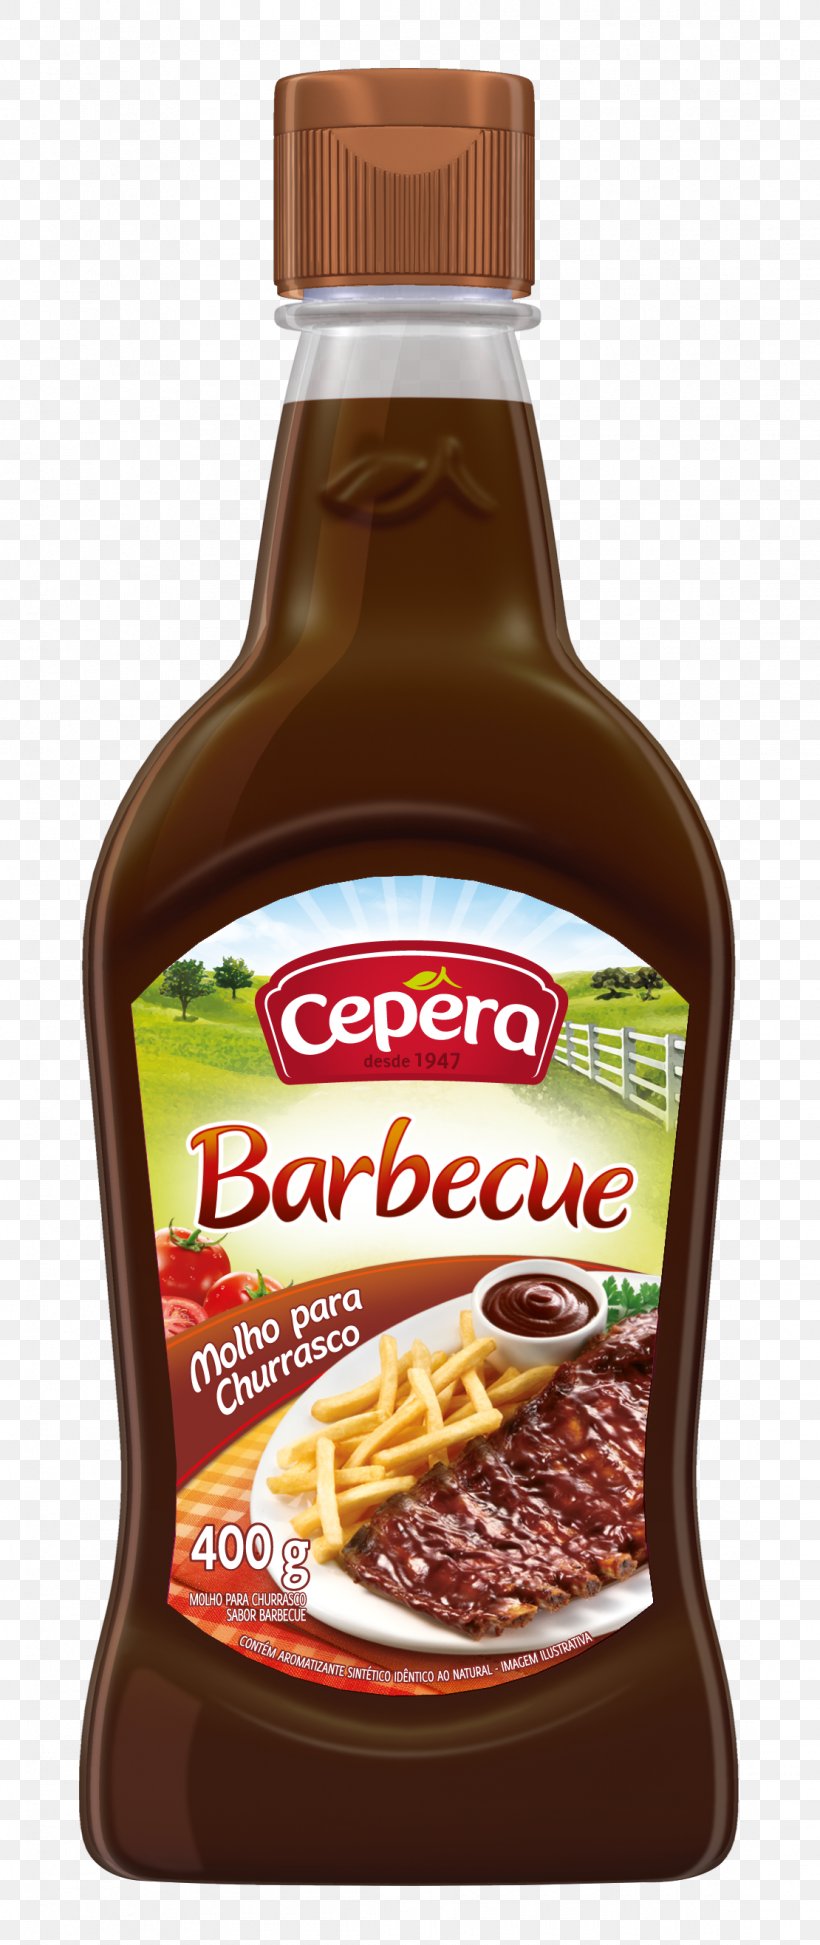 Ketchup Barbecue Sauce Churrasco, PNG, 1110x2633px, Ketchup, Barbecue, Barbecue Sauce, Black Pepper, Cajeta Download Free